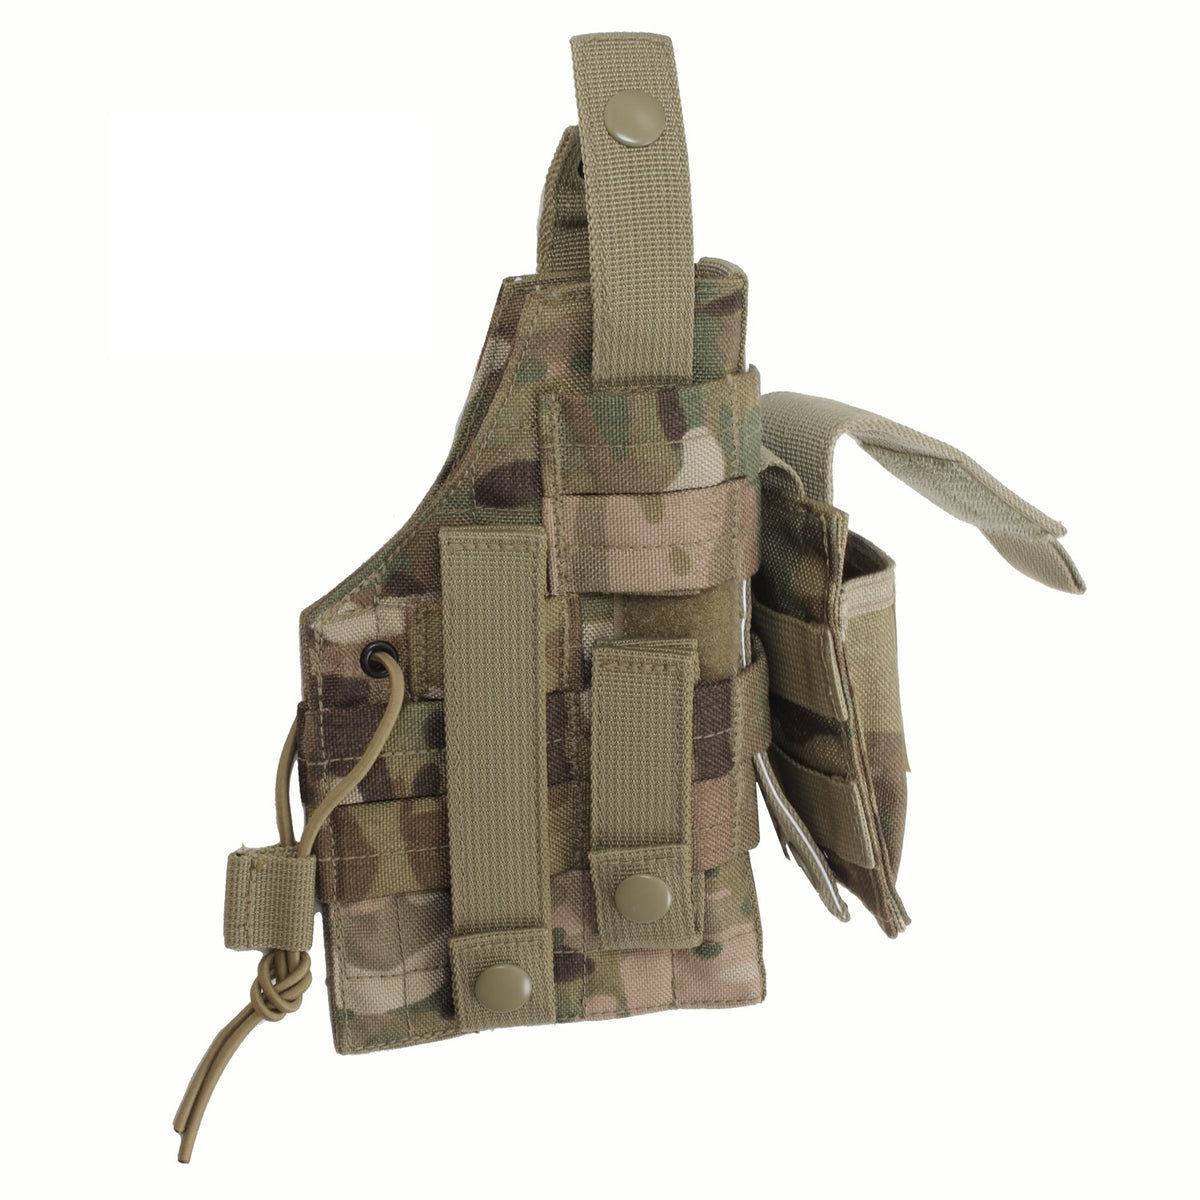 Rothco MOLLE Modular Ambidextrous Holster Multicam